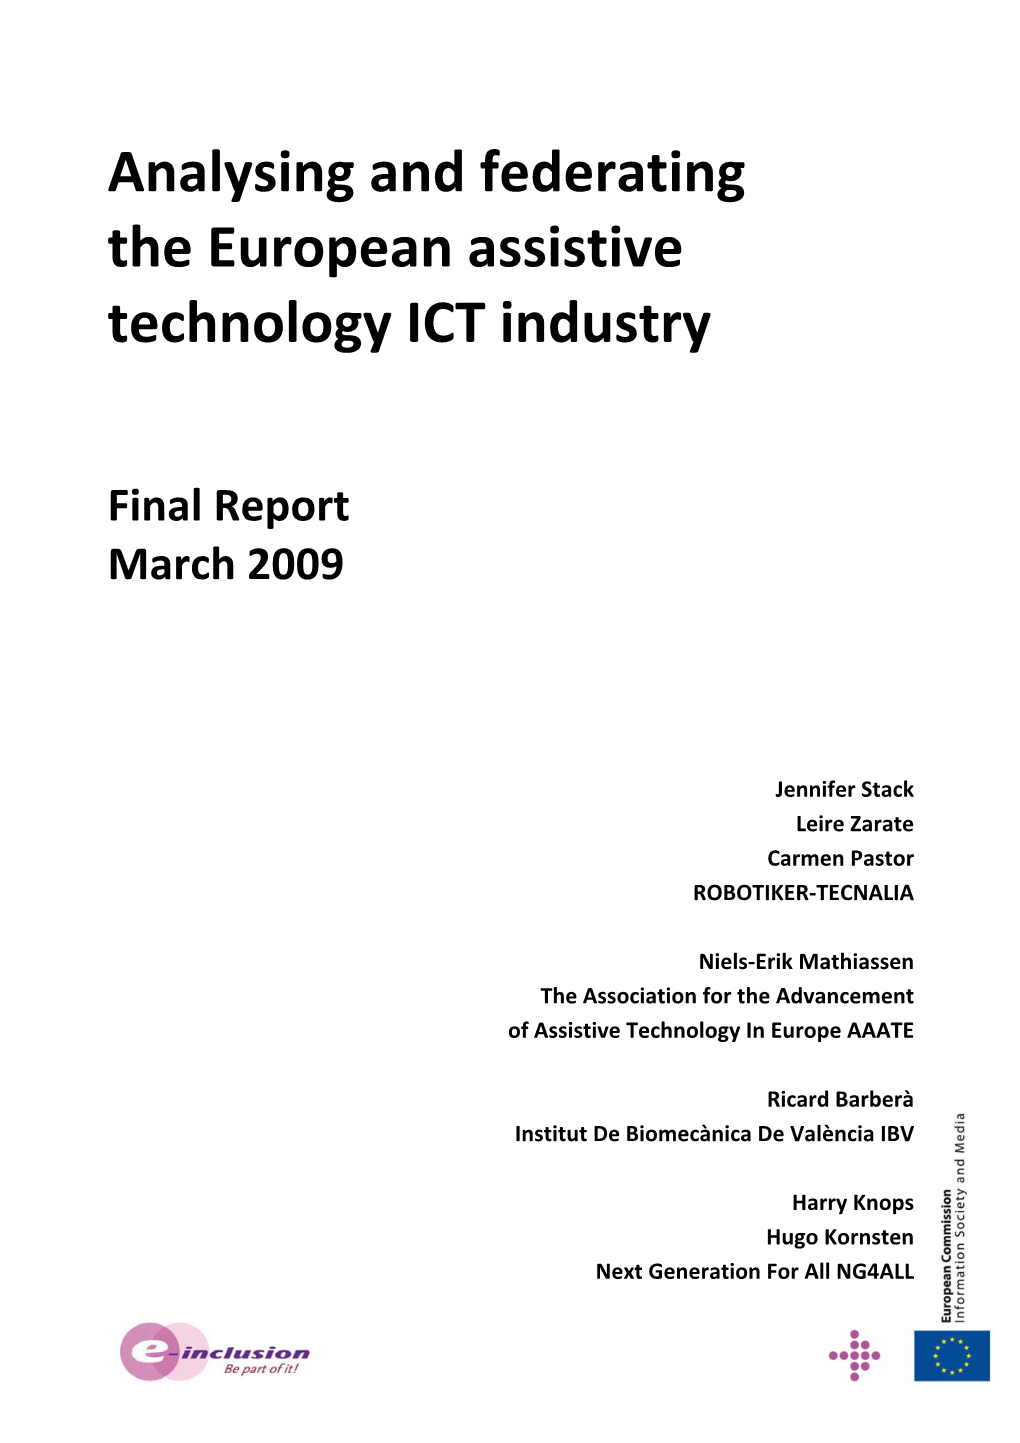 Analysing and Federating the European Assistive Technology ICT Industry